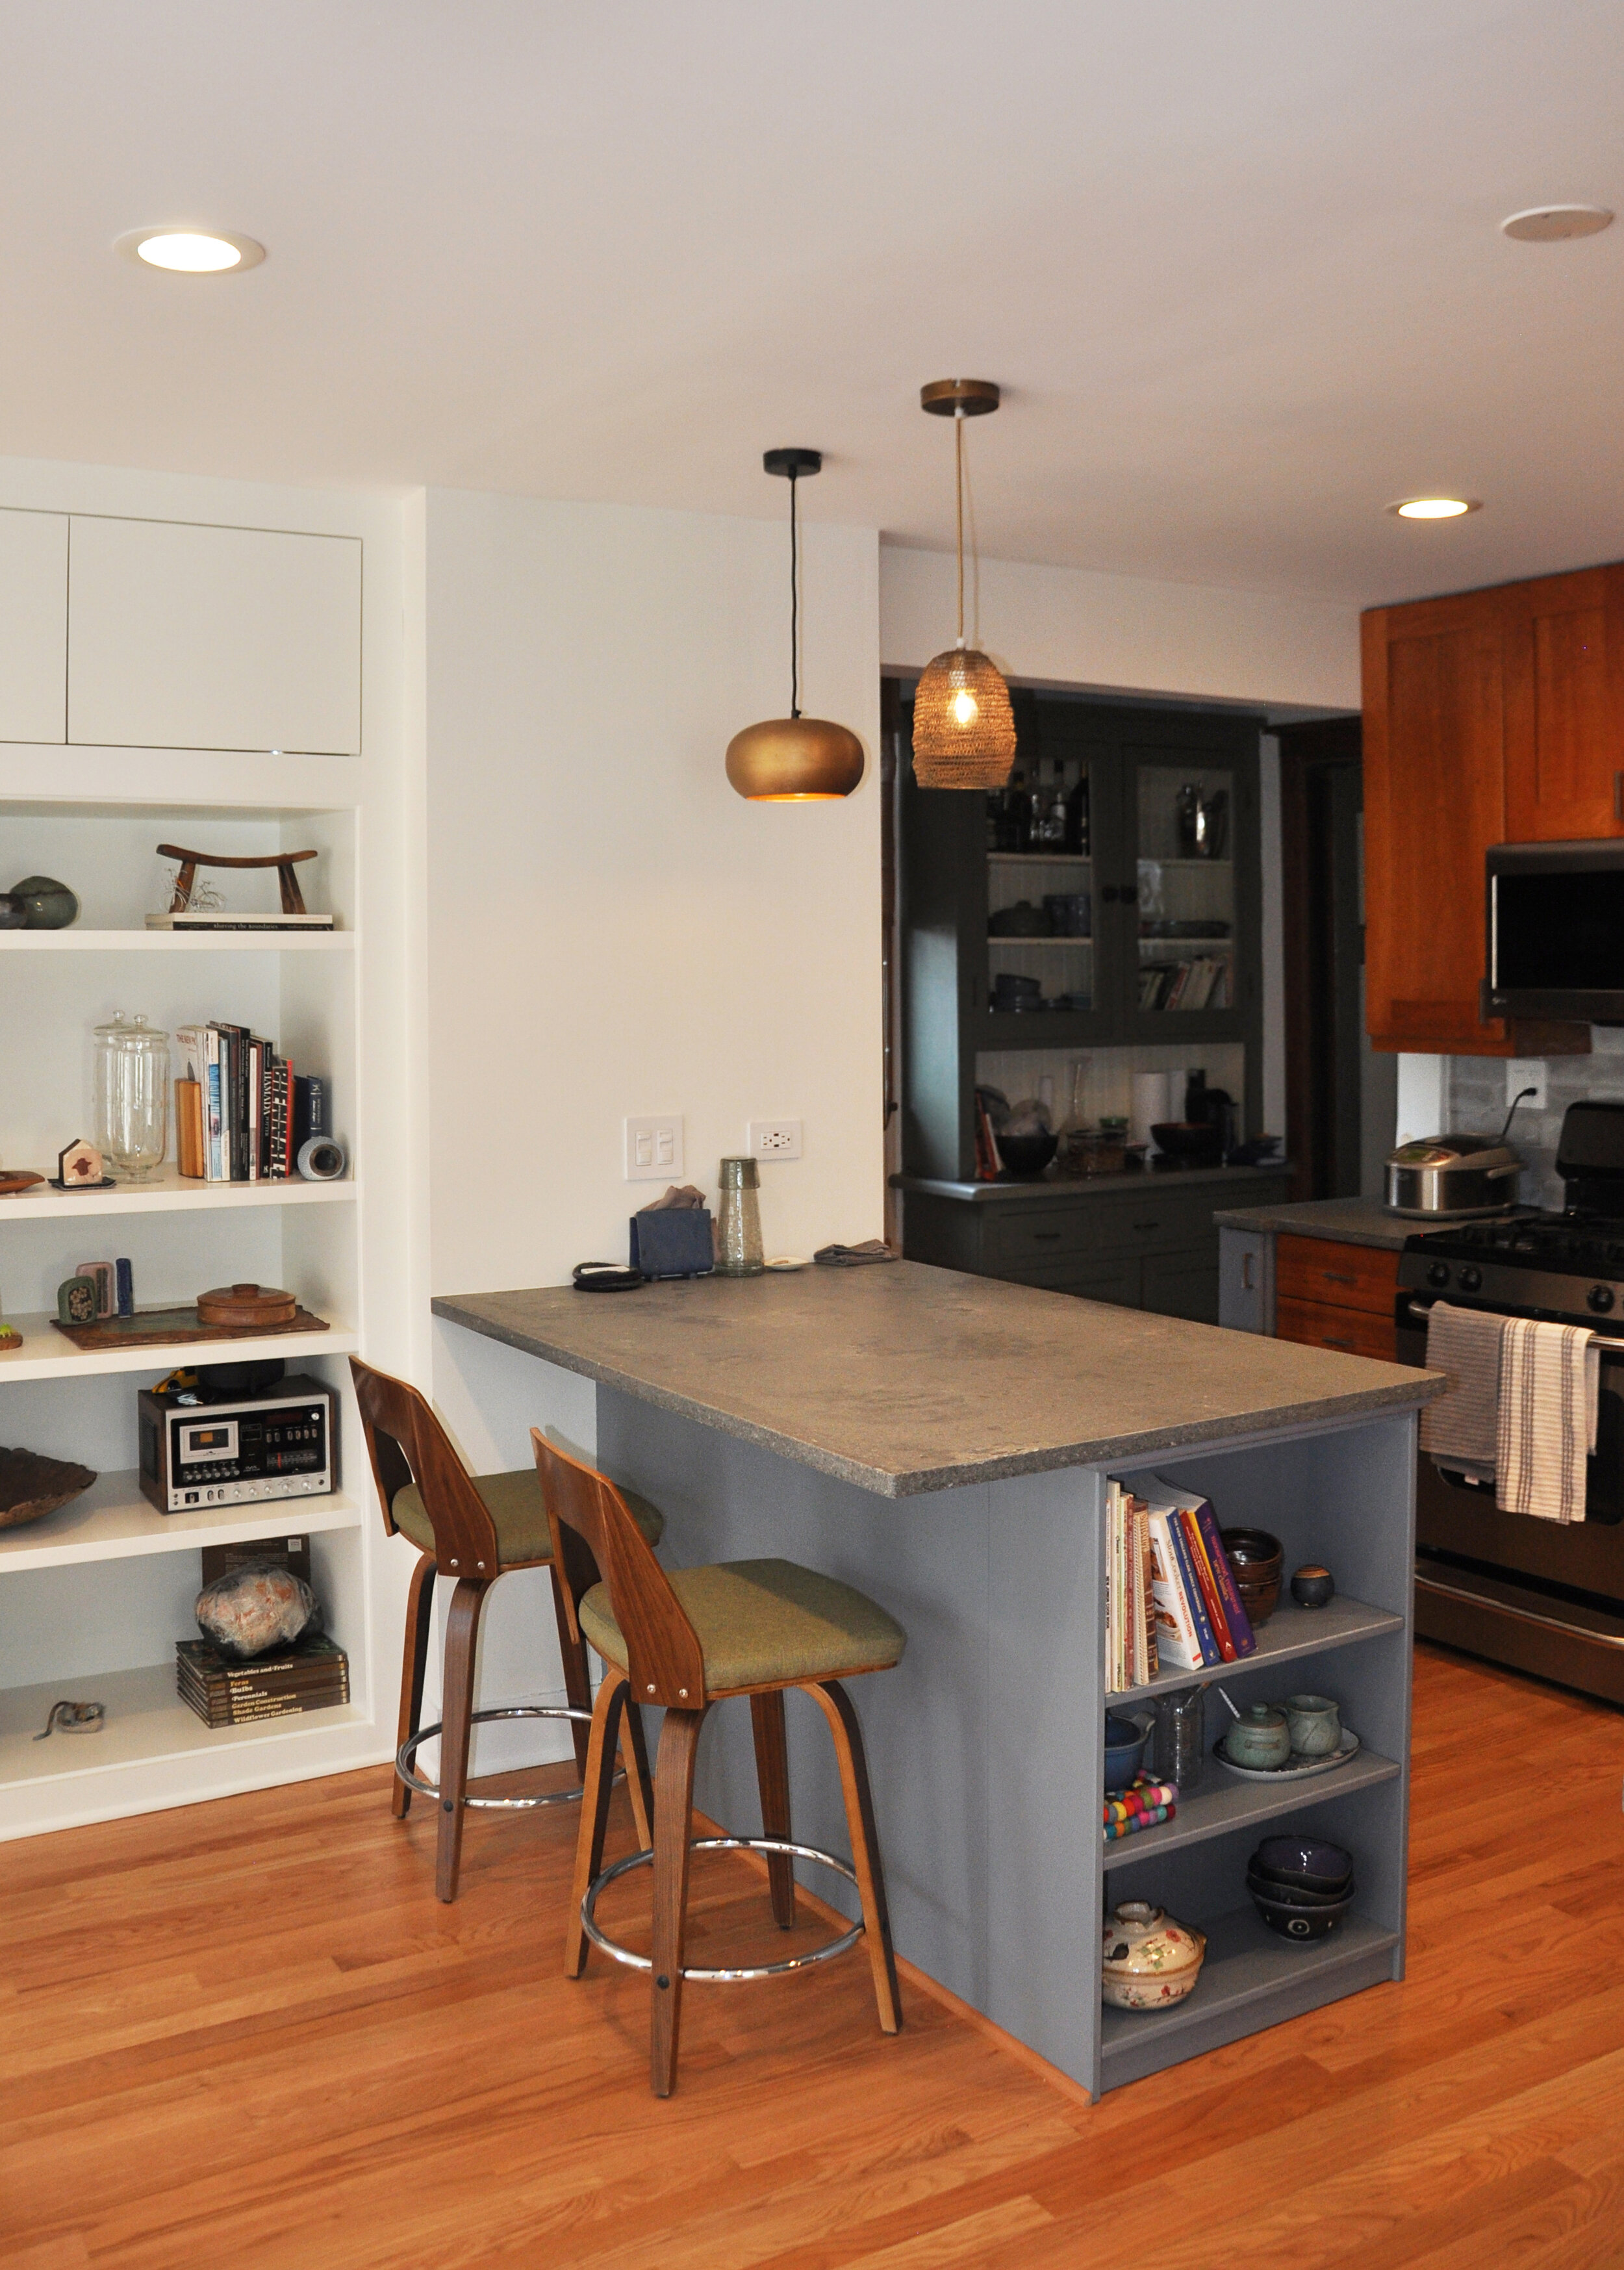 renovated kitchen with built-in bookshelf, hardwood floors, kitchen counter with stool seating